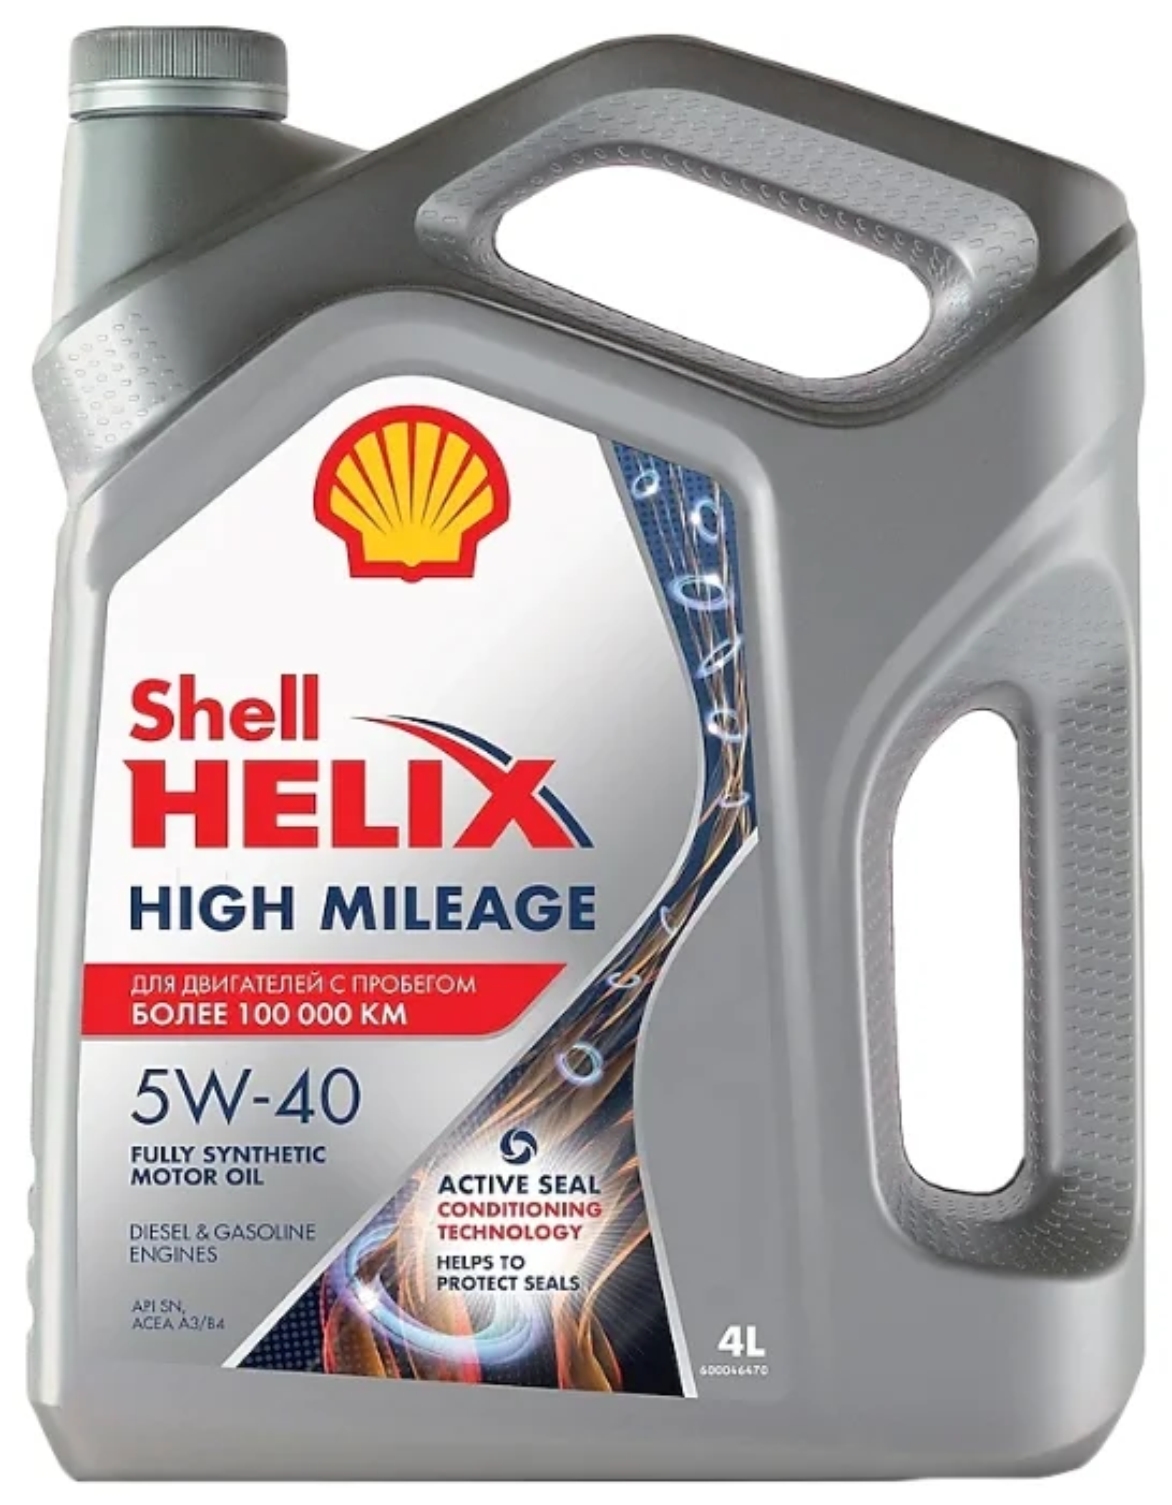 SHELL Helix High Mileage 5W-40 4 л